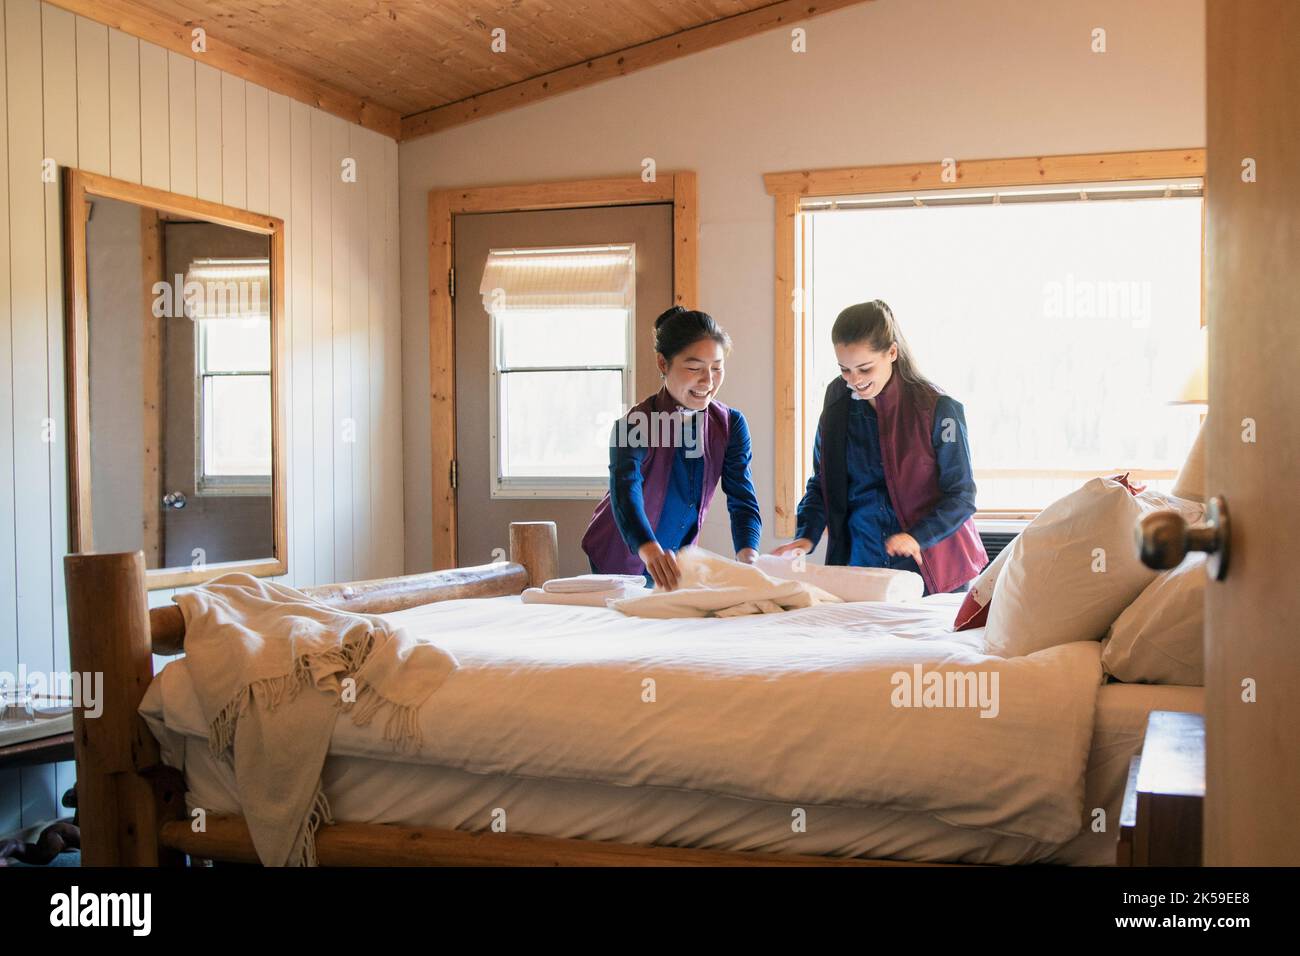 Female hotel employees preparing linens on lodge bed Stock Photo